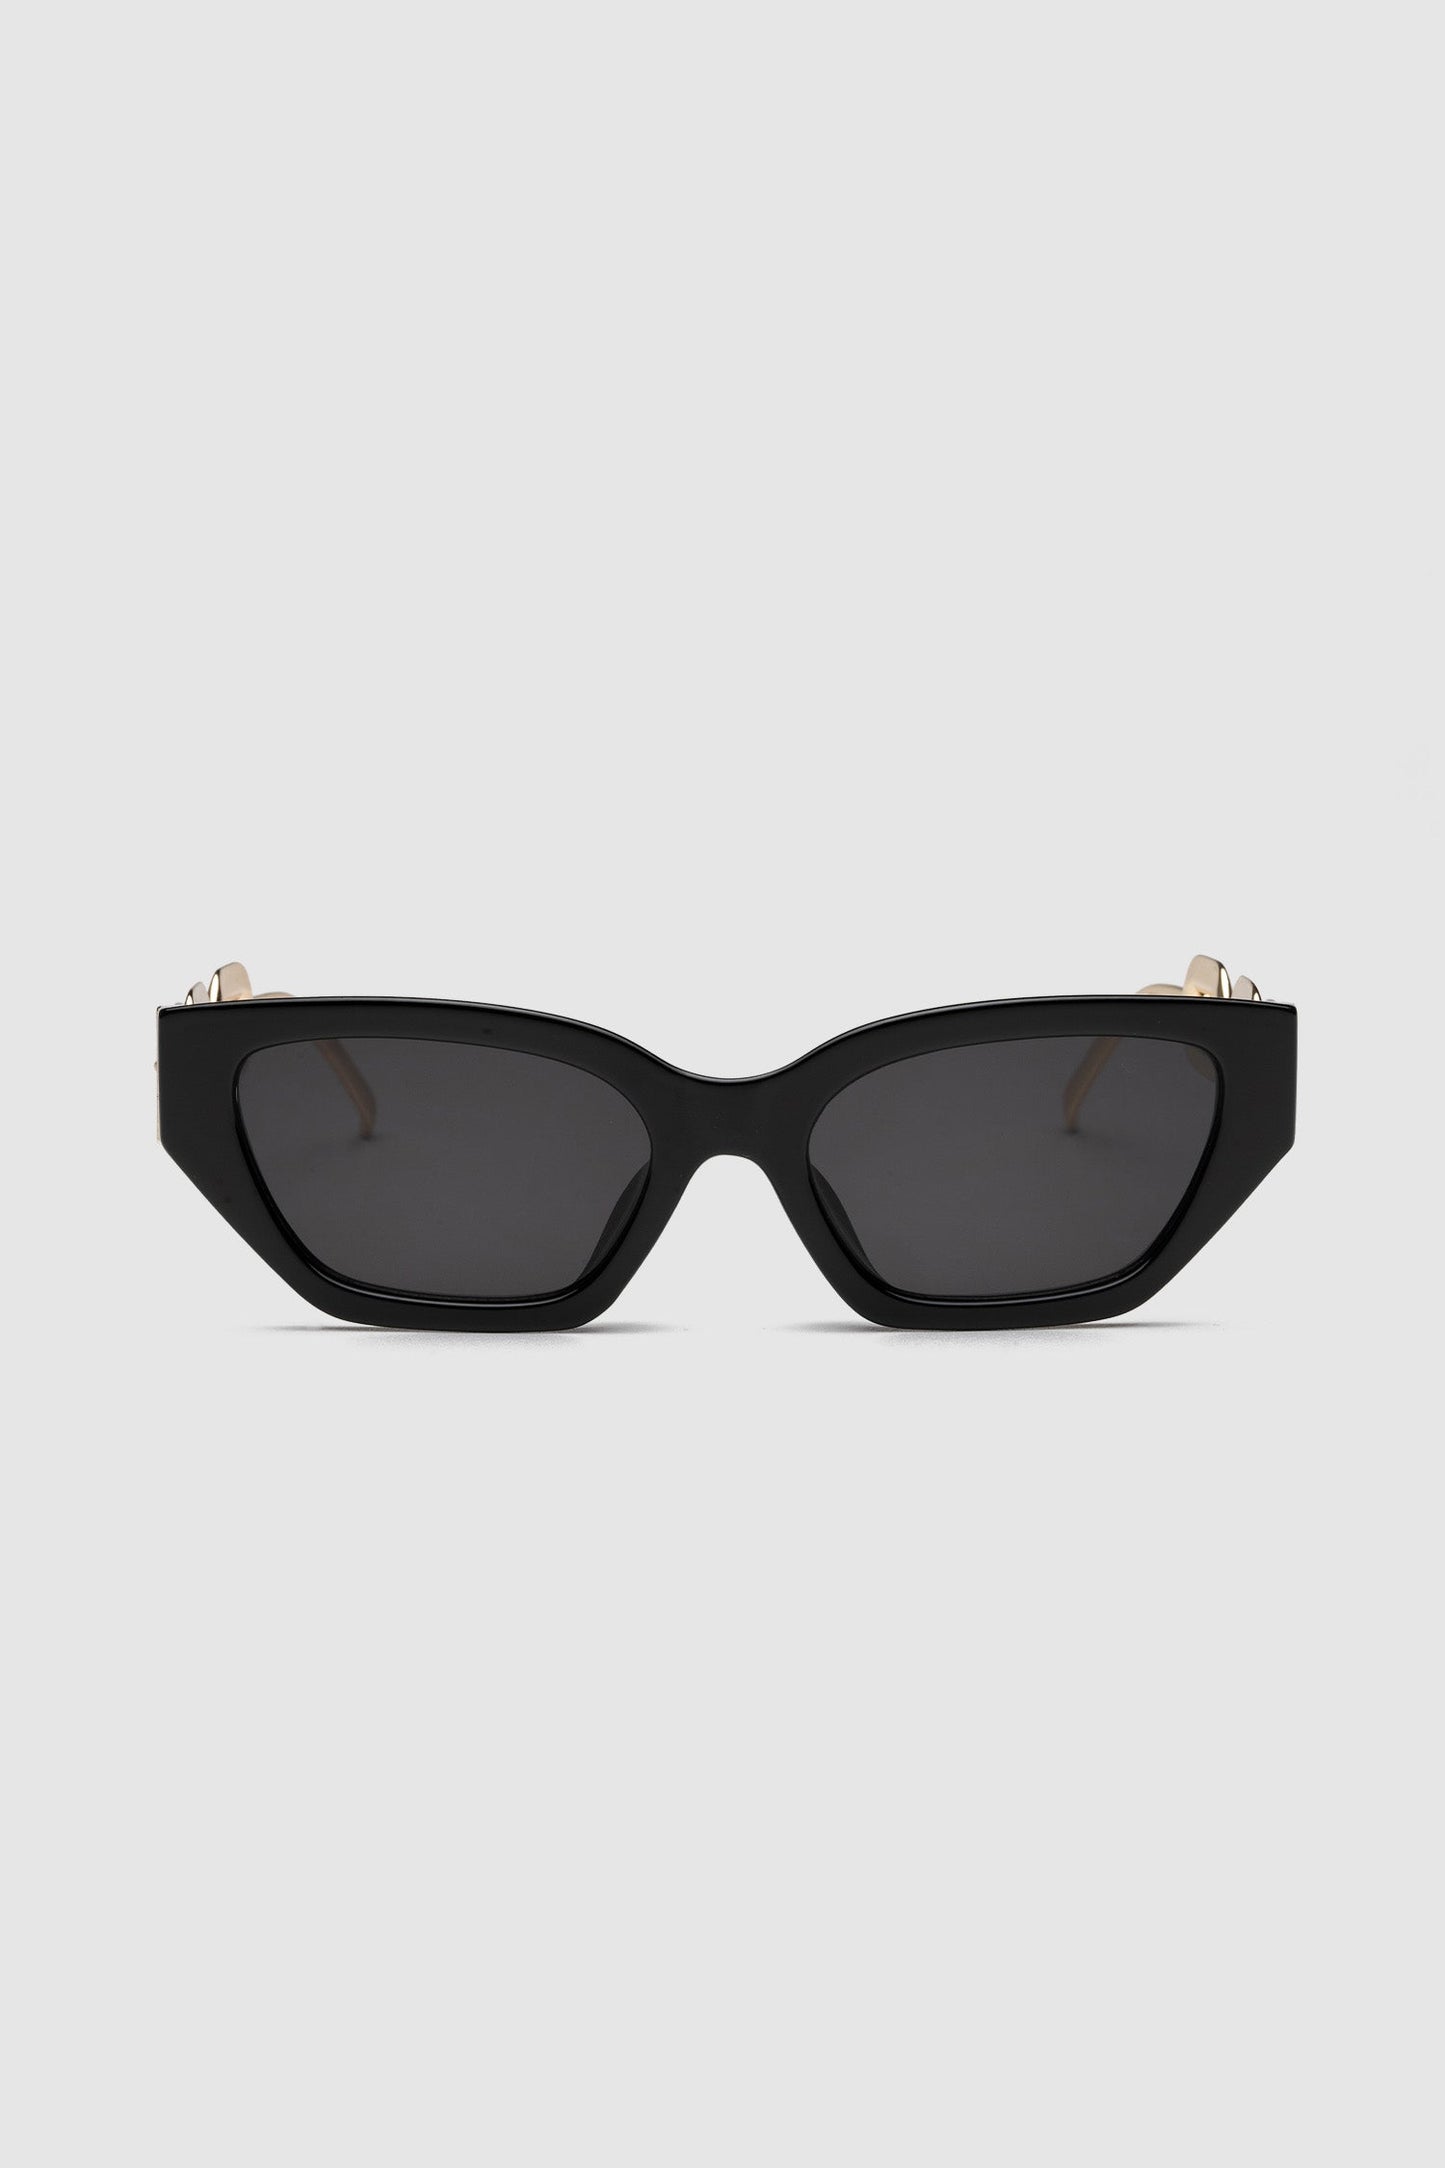 ROMA Cat Eyes with Gold Chain Arms - Black